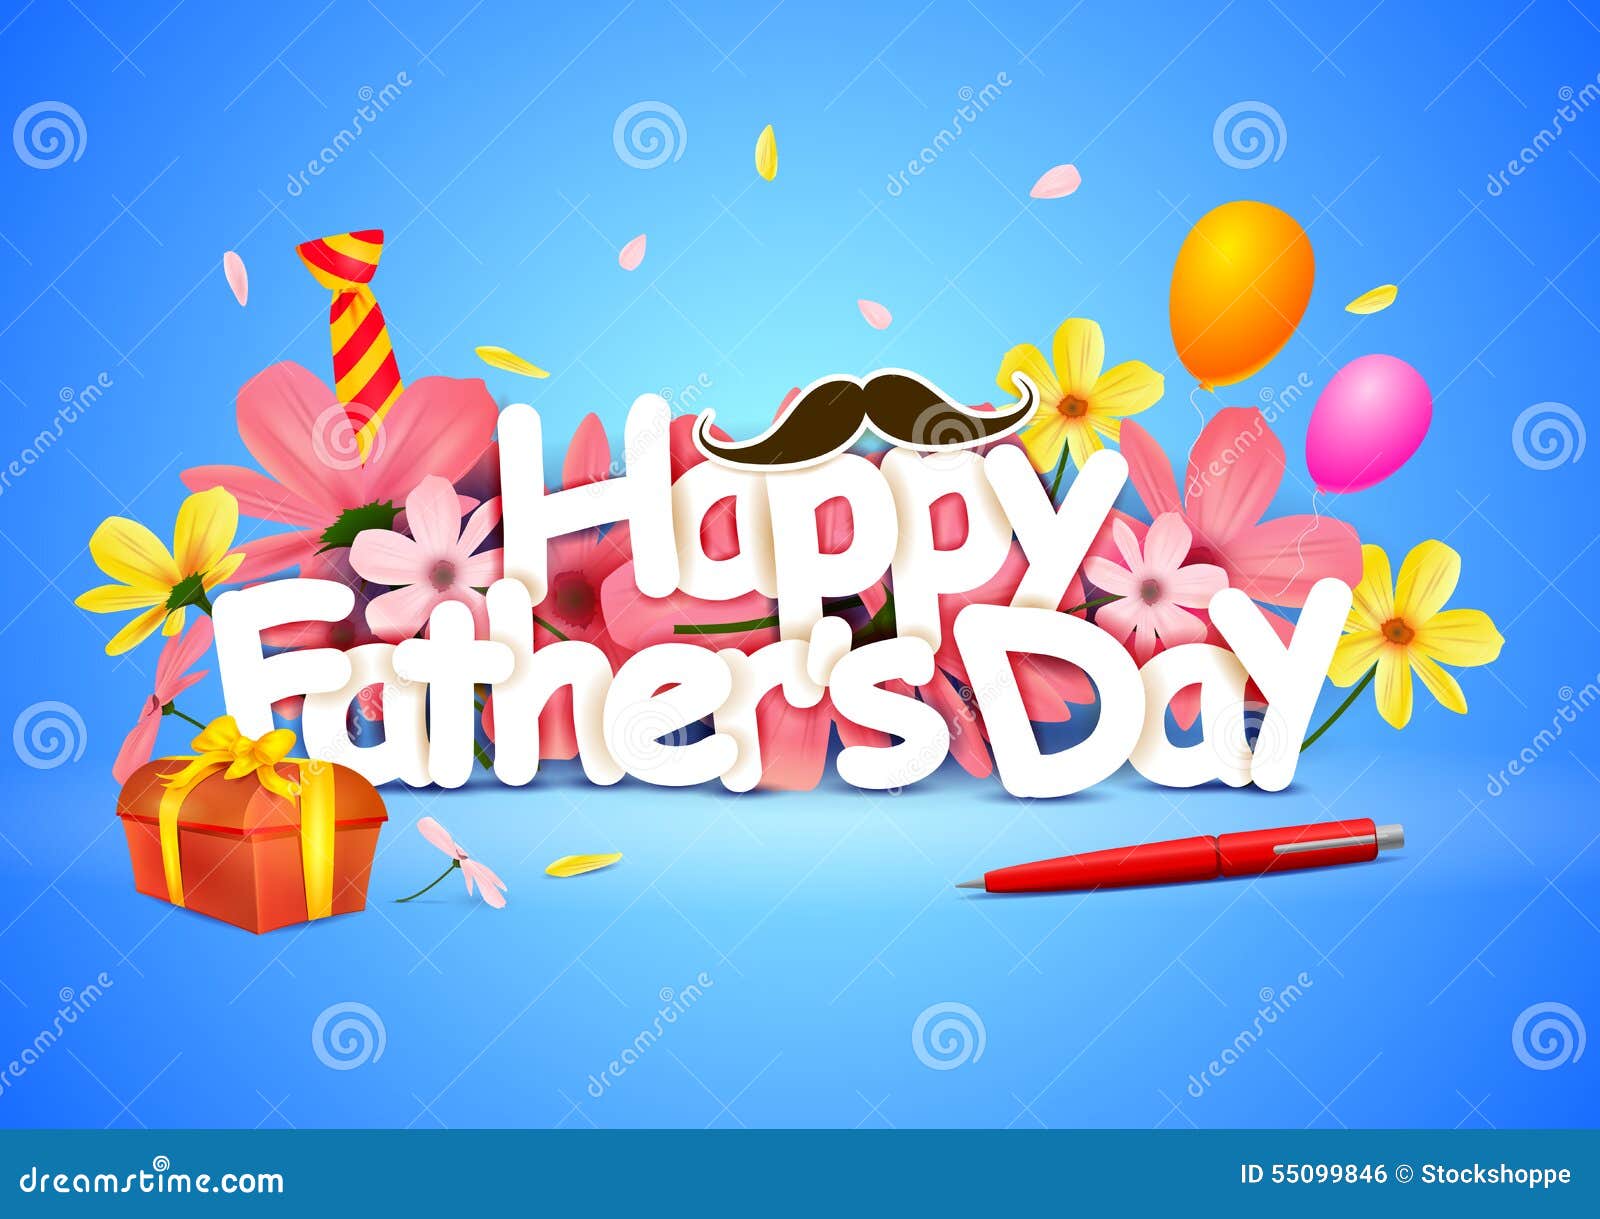 HD fathers day wallpapers  Peakpx